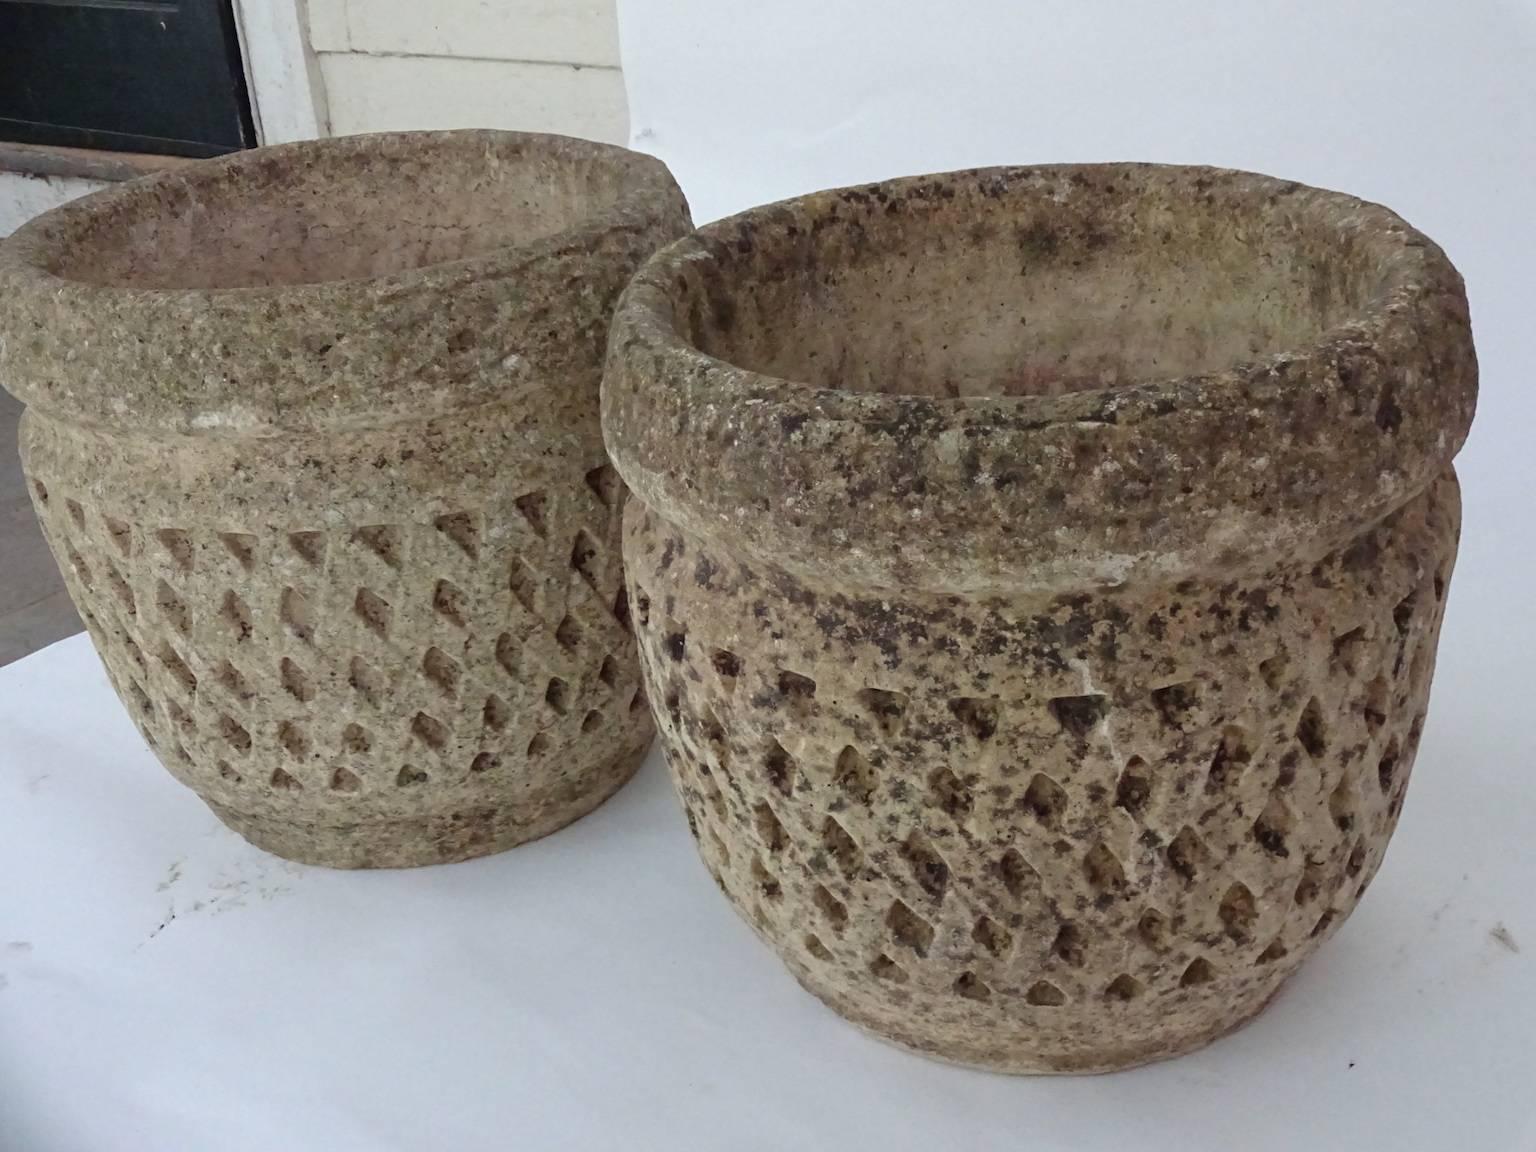 Handsome pair of English cast stone planters or urns with attractive honeycomb pattern, circa 1950. Lovely patina.